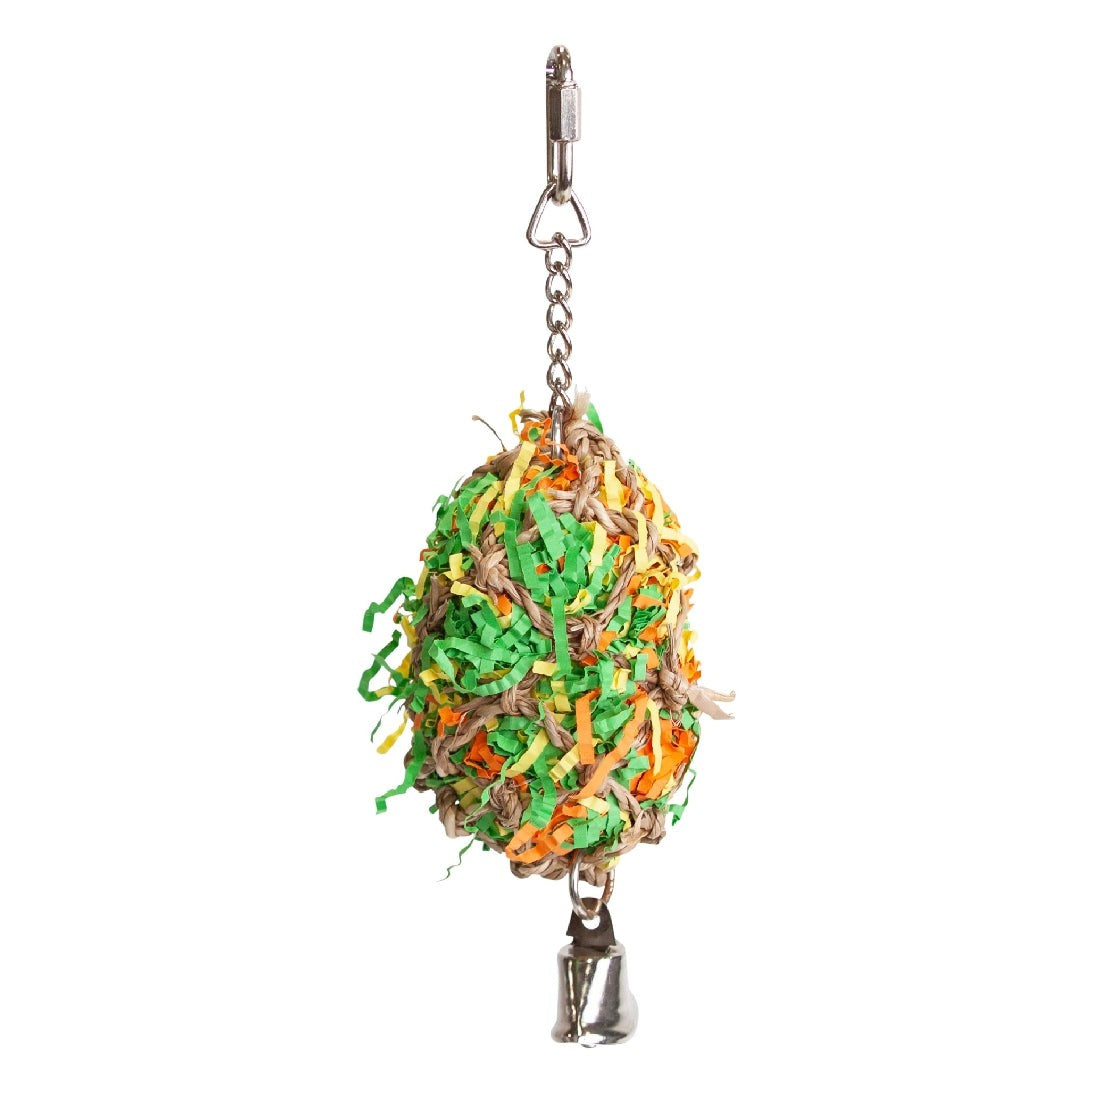 Colorful shredded paper bird toy with chain and bell attachment.